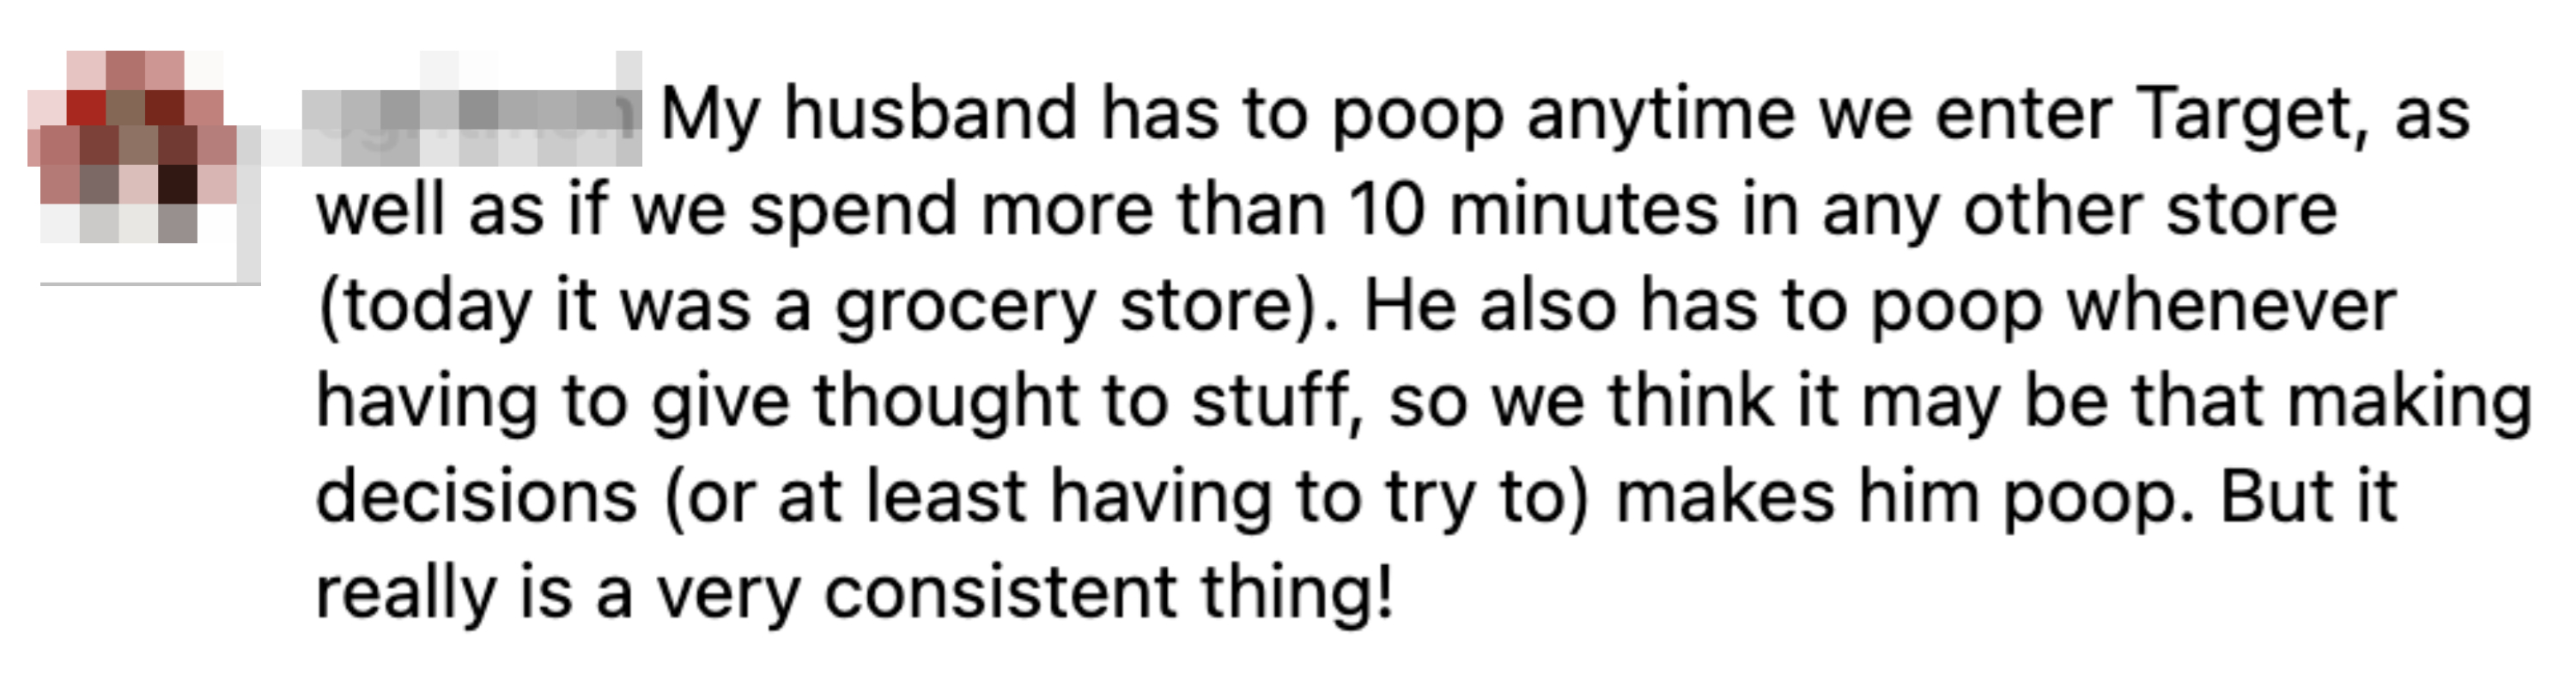 &quot;My husband has to poop anytime we enter Target, as well as of we spend more than 10 minutes in any other store (today it was a grocery store)&quot;